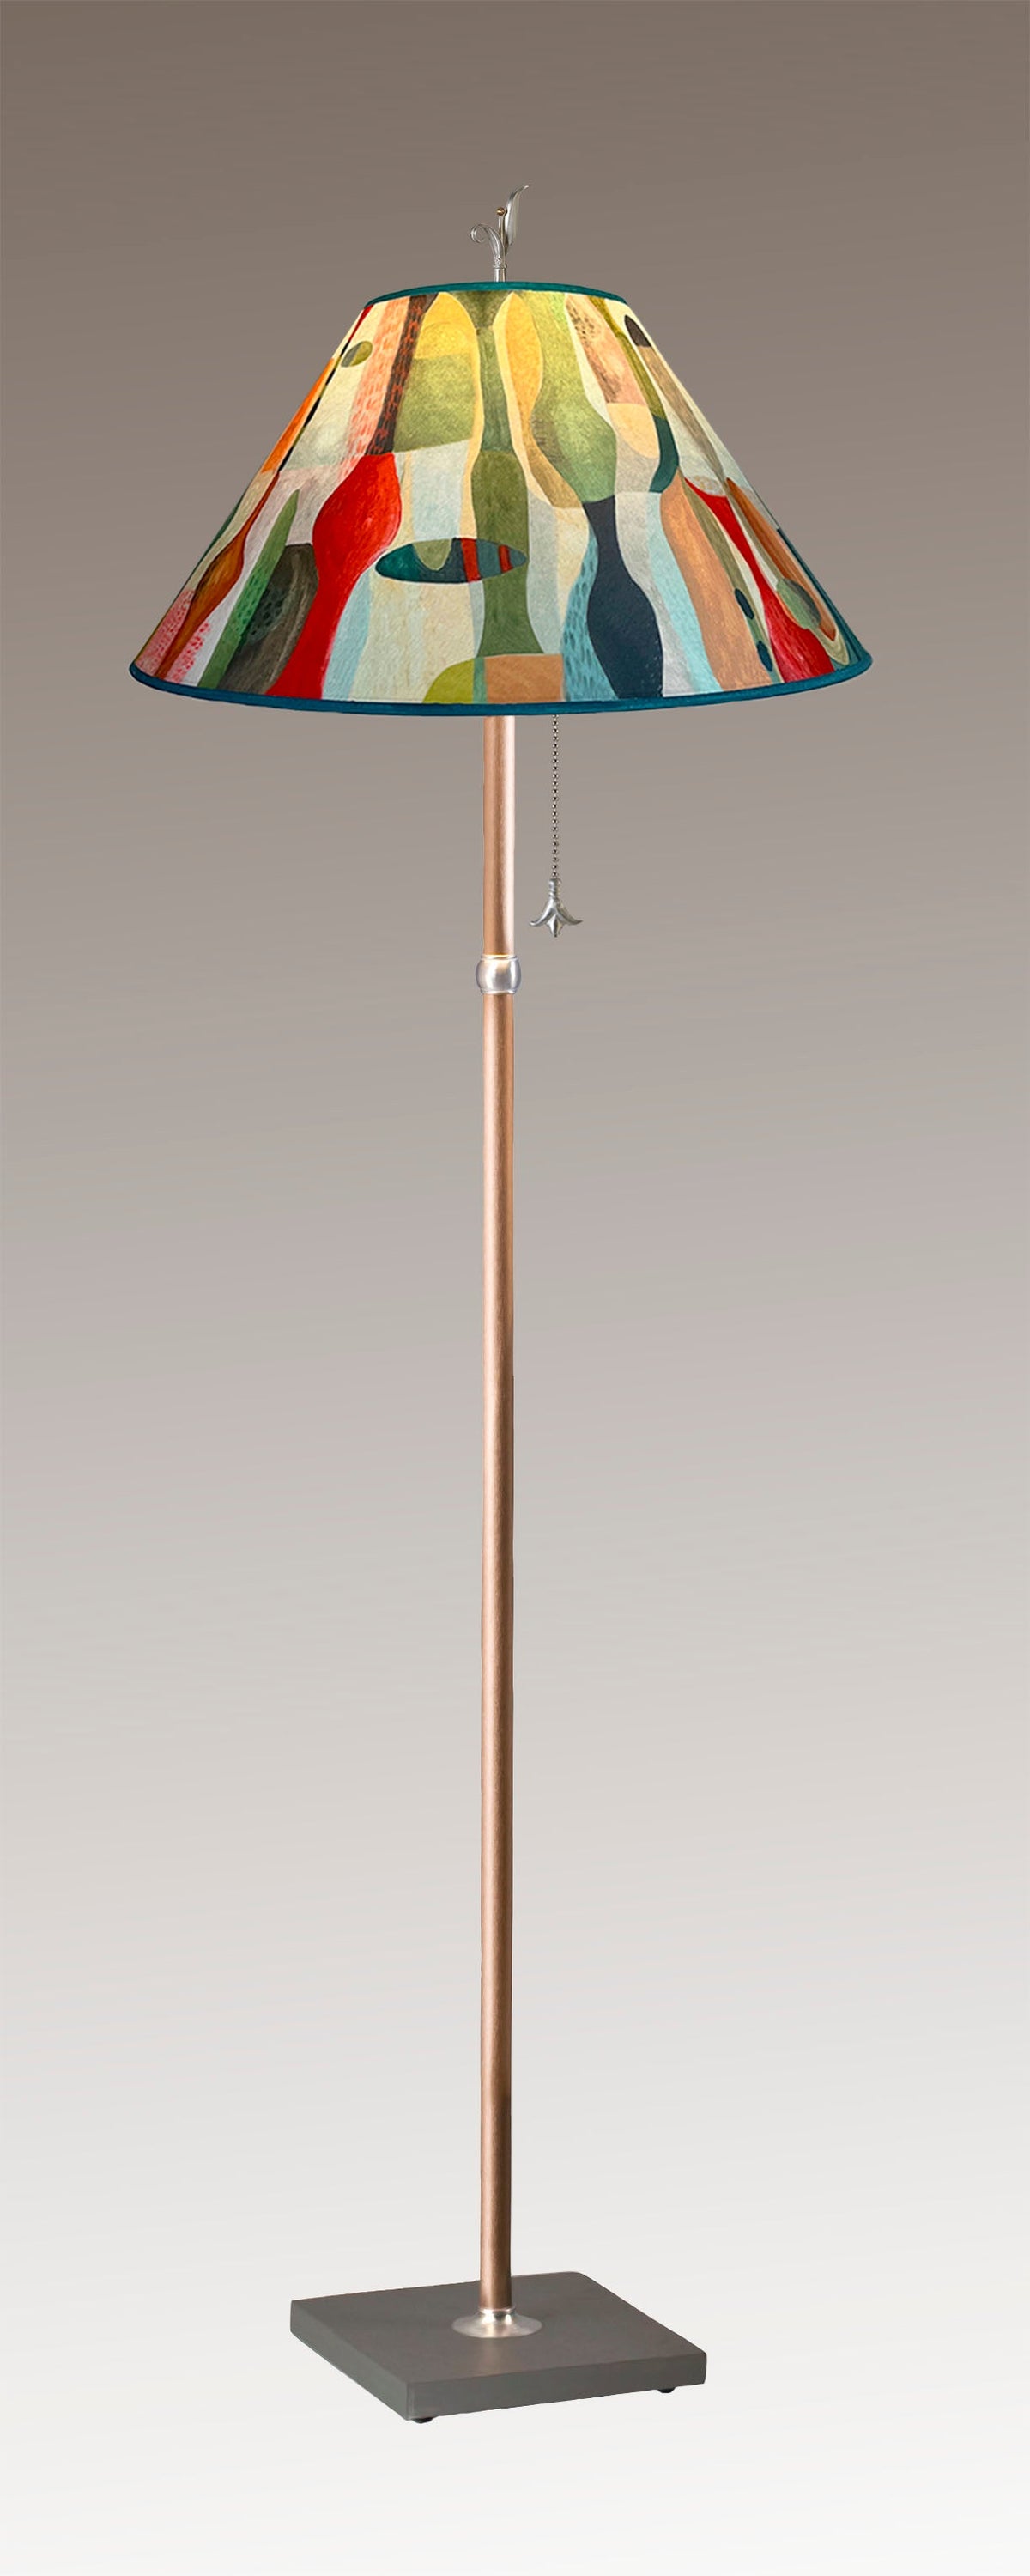 Copper Floor Lamp with Large Conical Shade in Riviera in Poppy